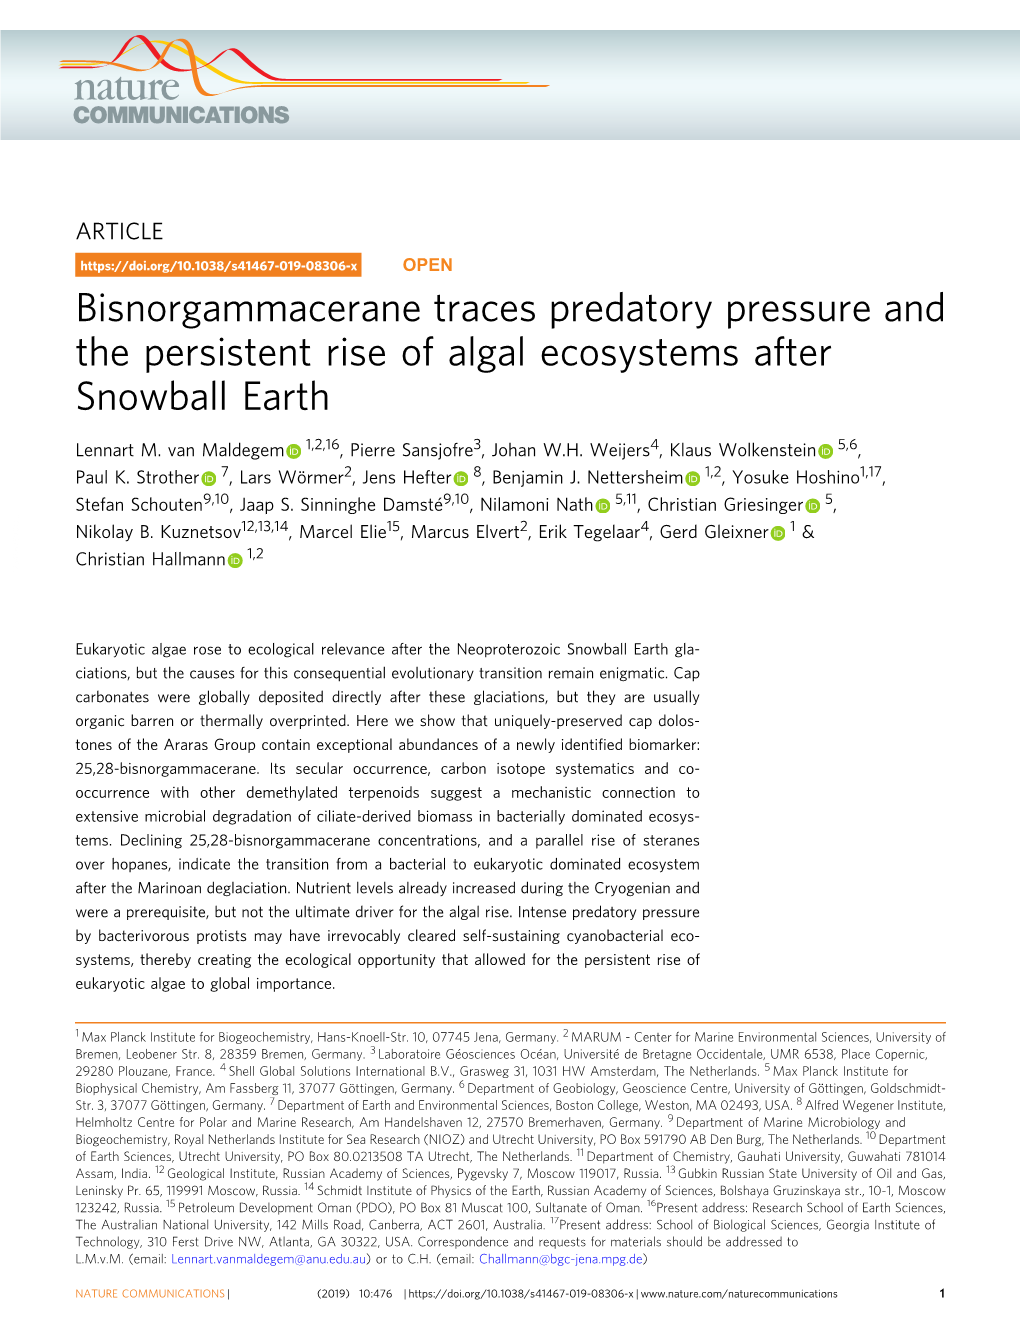 Bisnorgammacerane Traces Predatory Pressure and the Persistent Rise of Algal Ecosystems After Snowball Earth